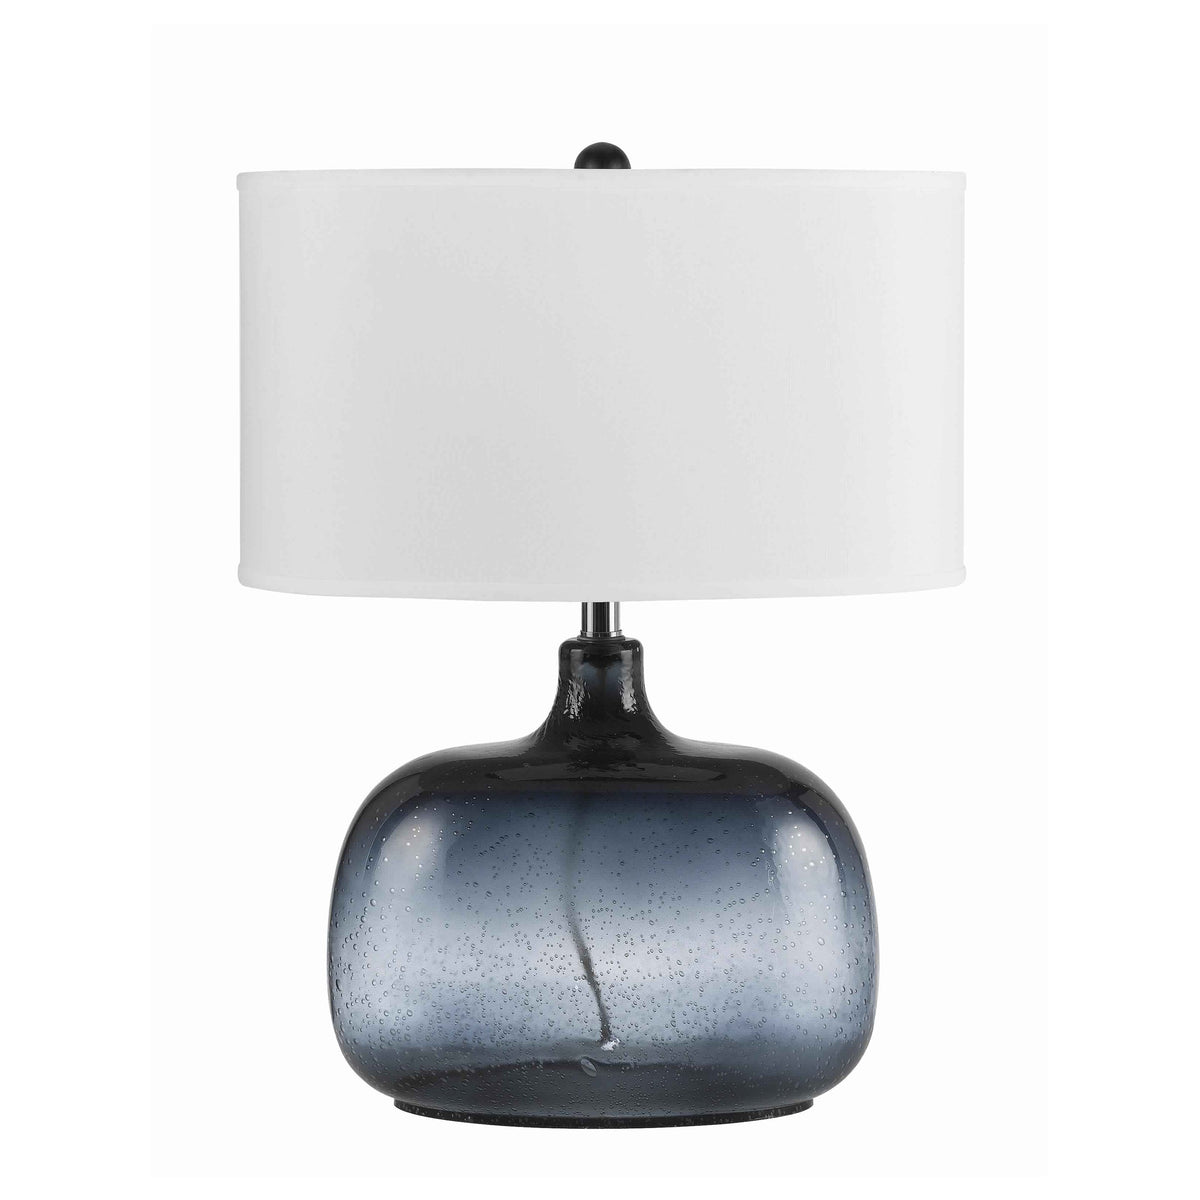 Glass Body Table Lamp with Drum Shade and Bubble Design, Blue and White - BM223699